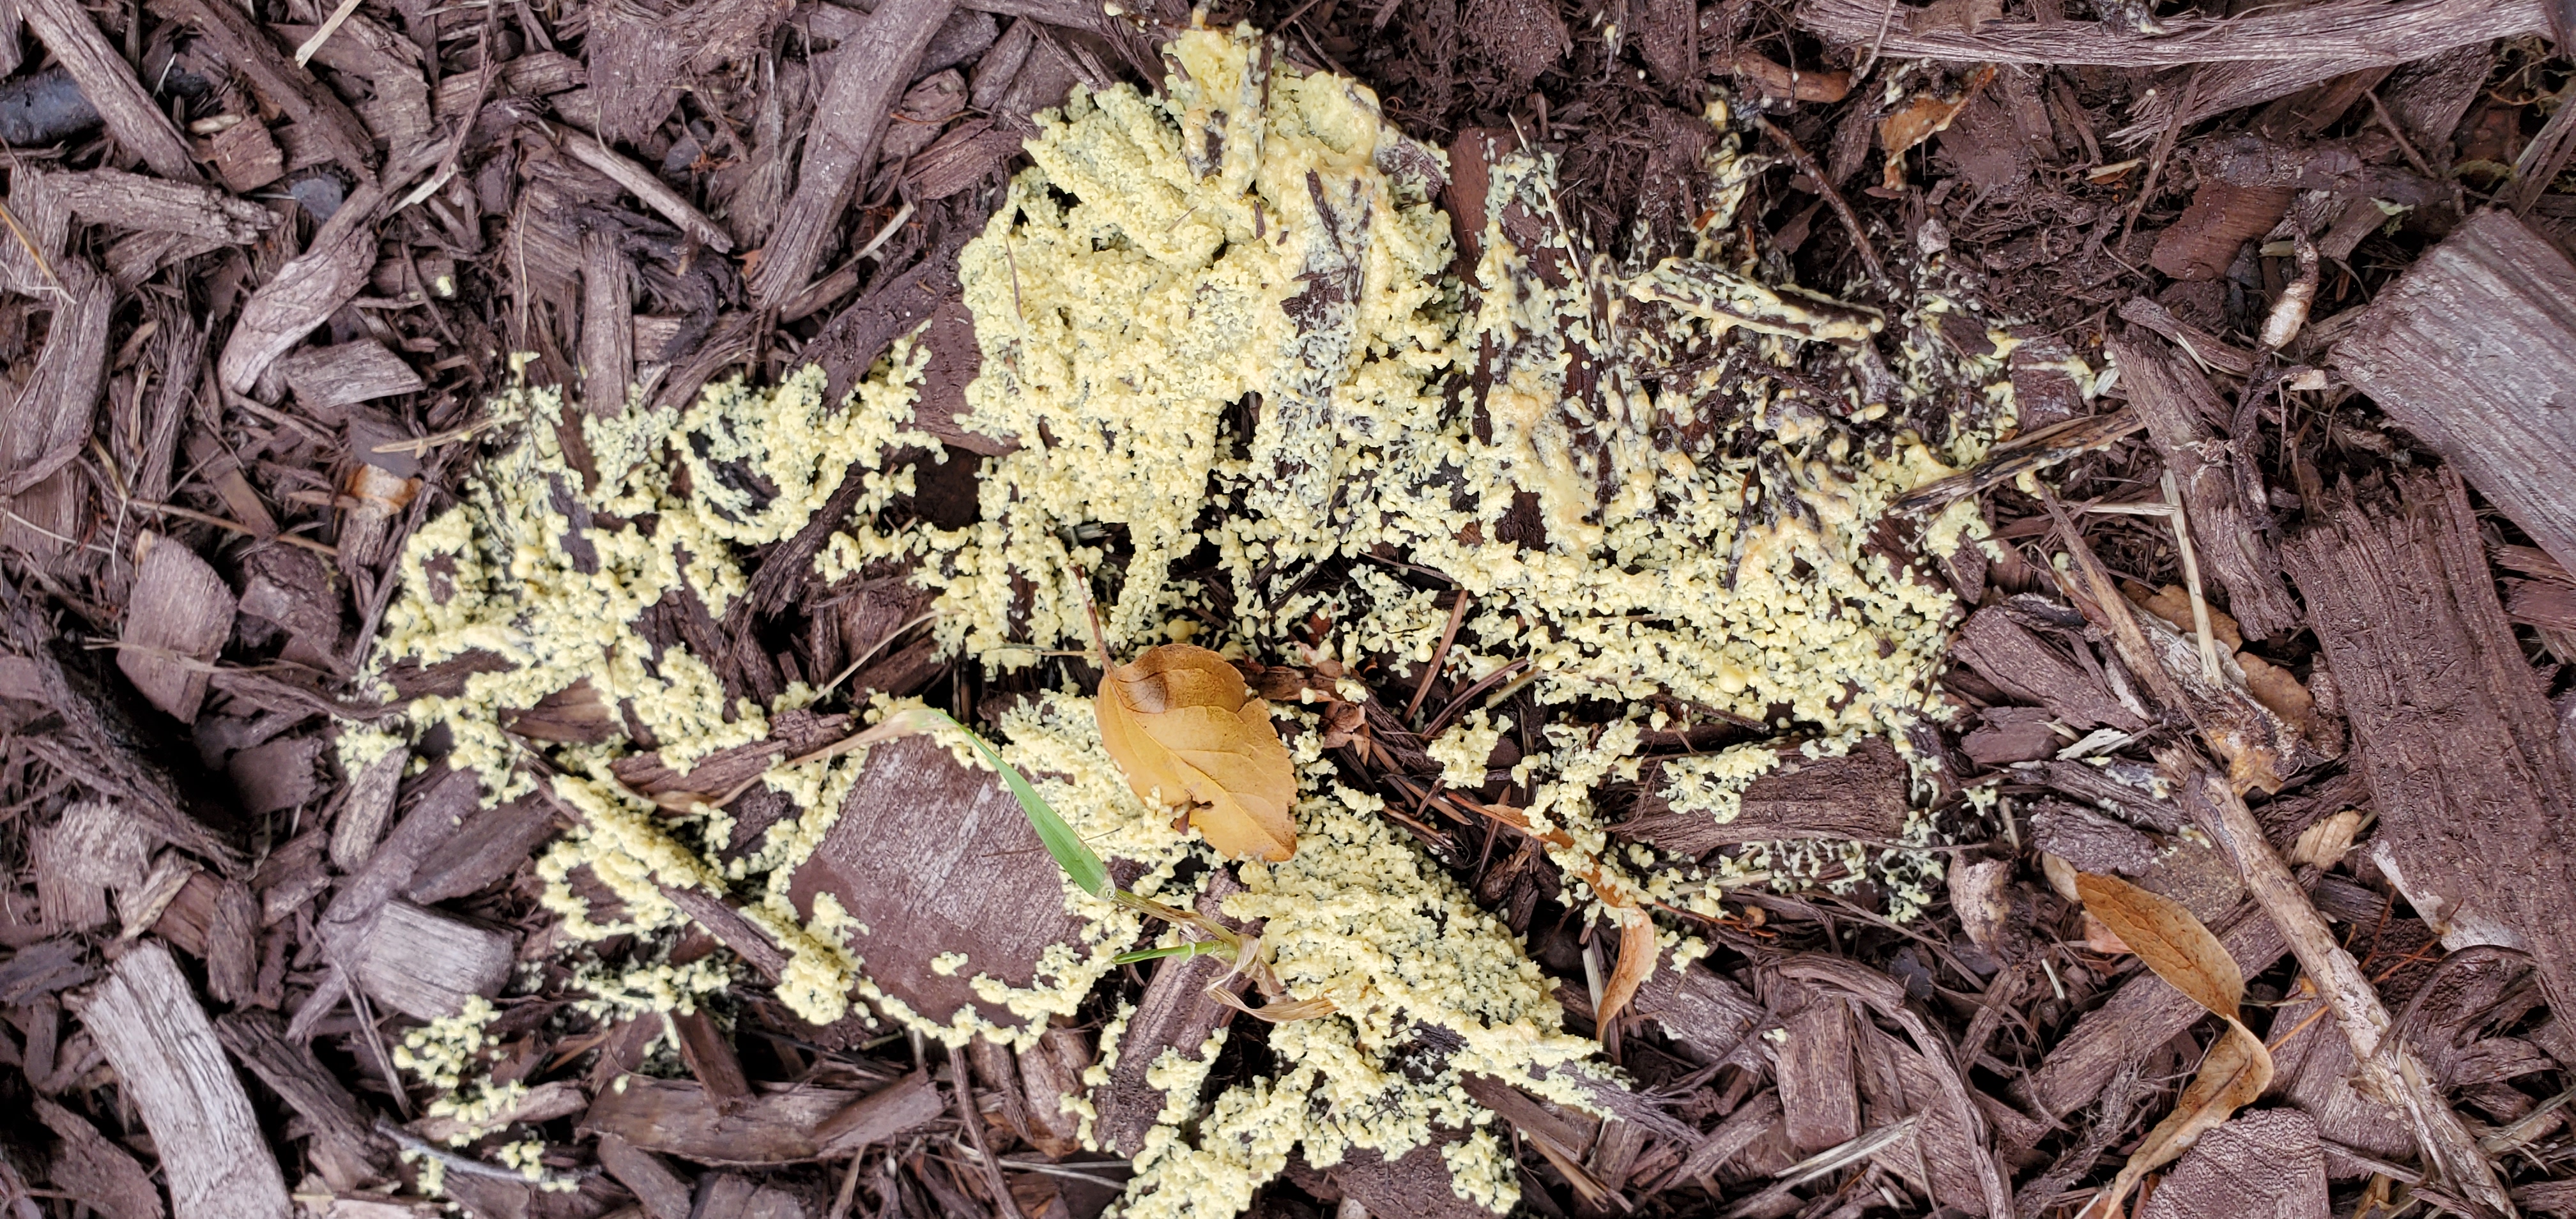 That White Stuff on Mulch Is Slime Mold